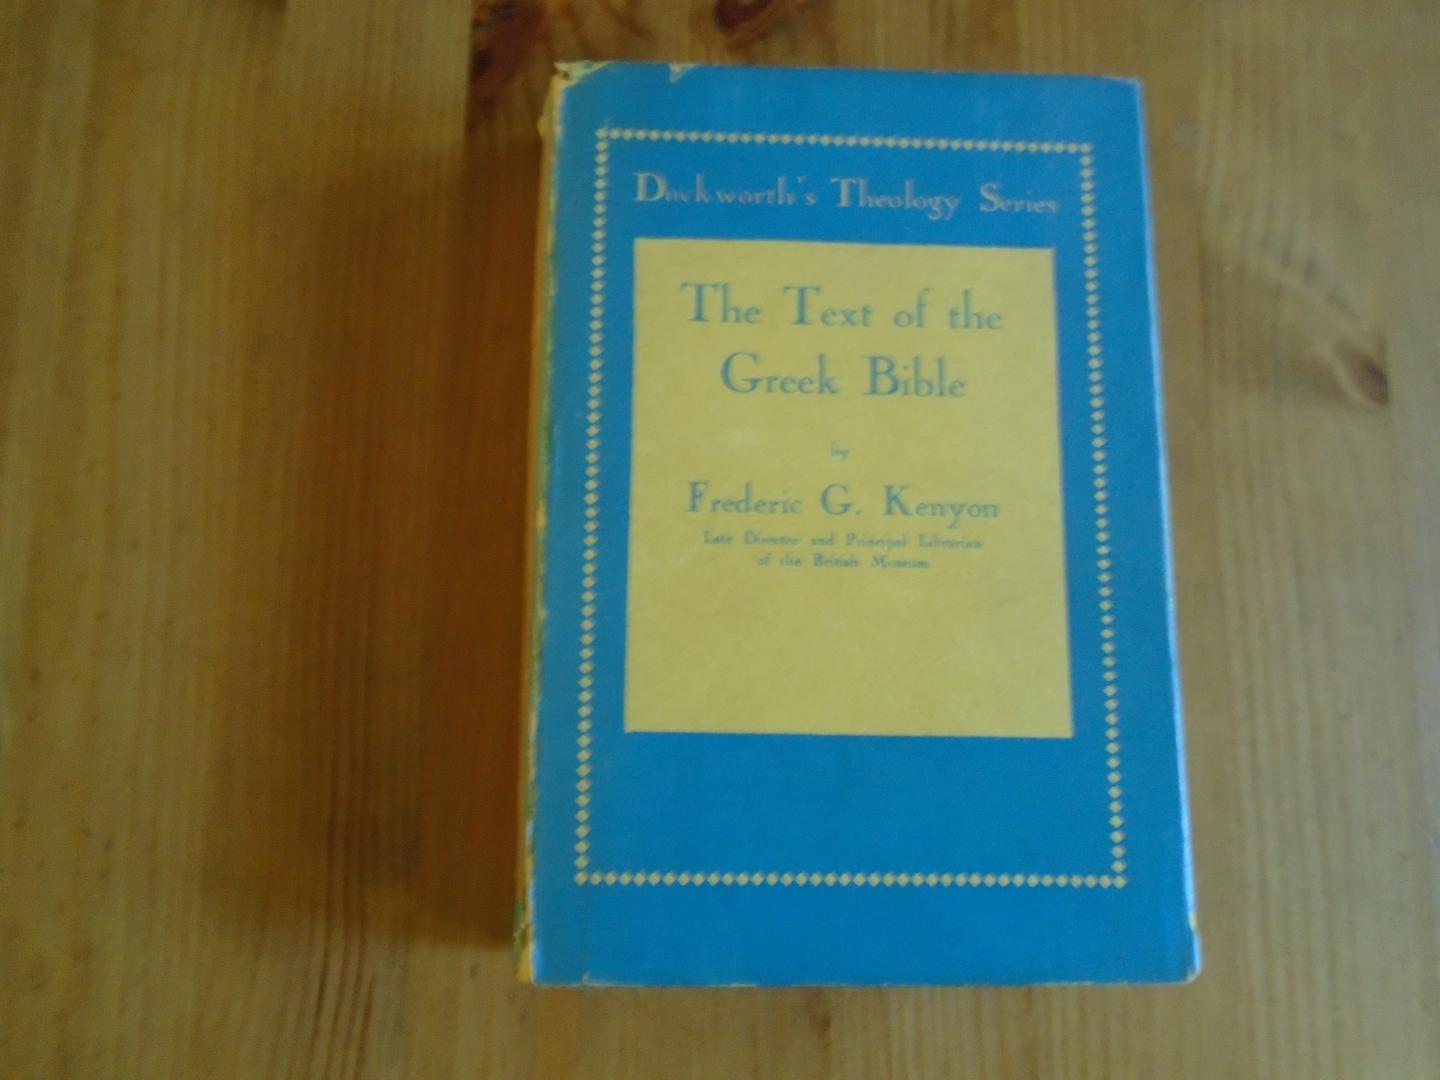 Kenyon, Frederic G. - The Text of the Greek Bible. A Student's Handbook